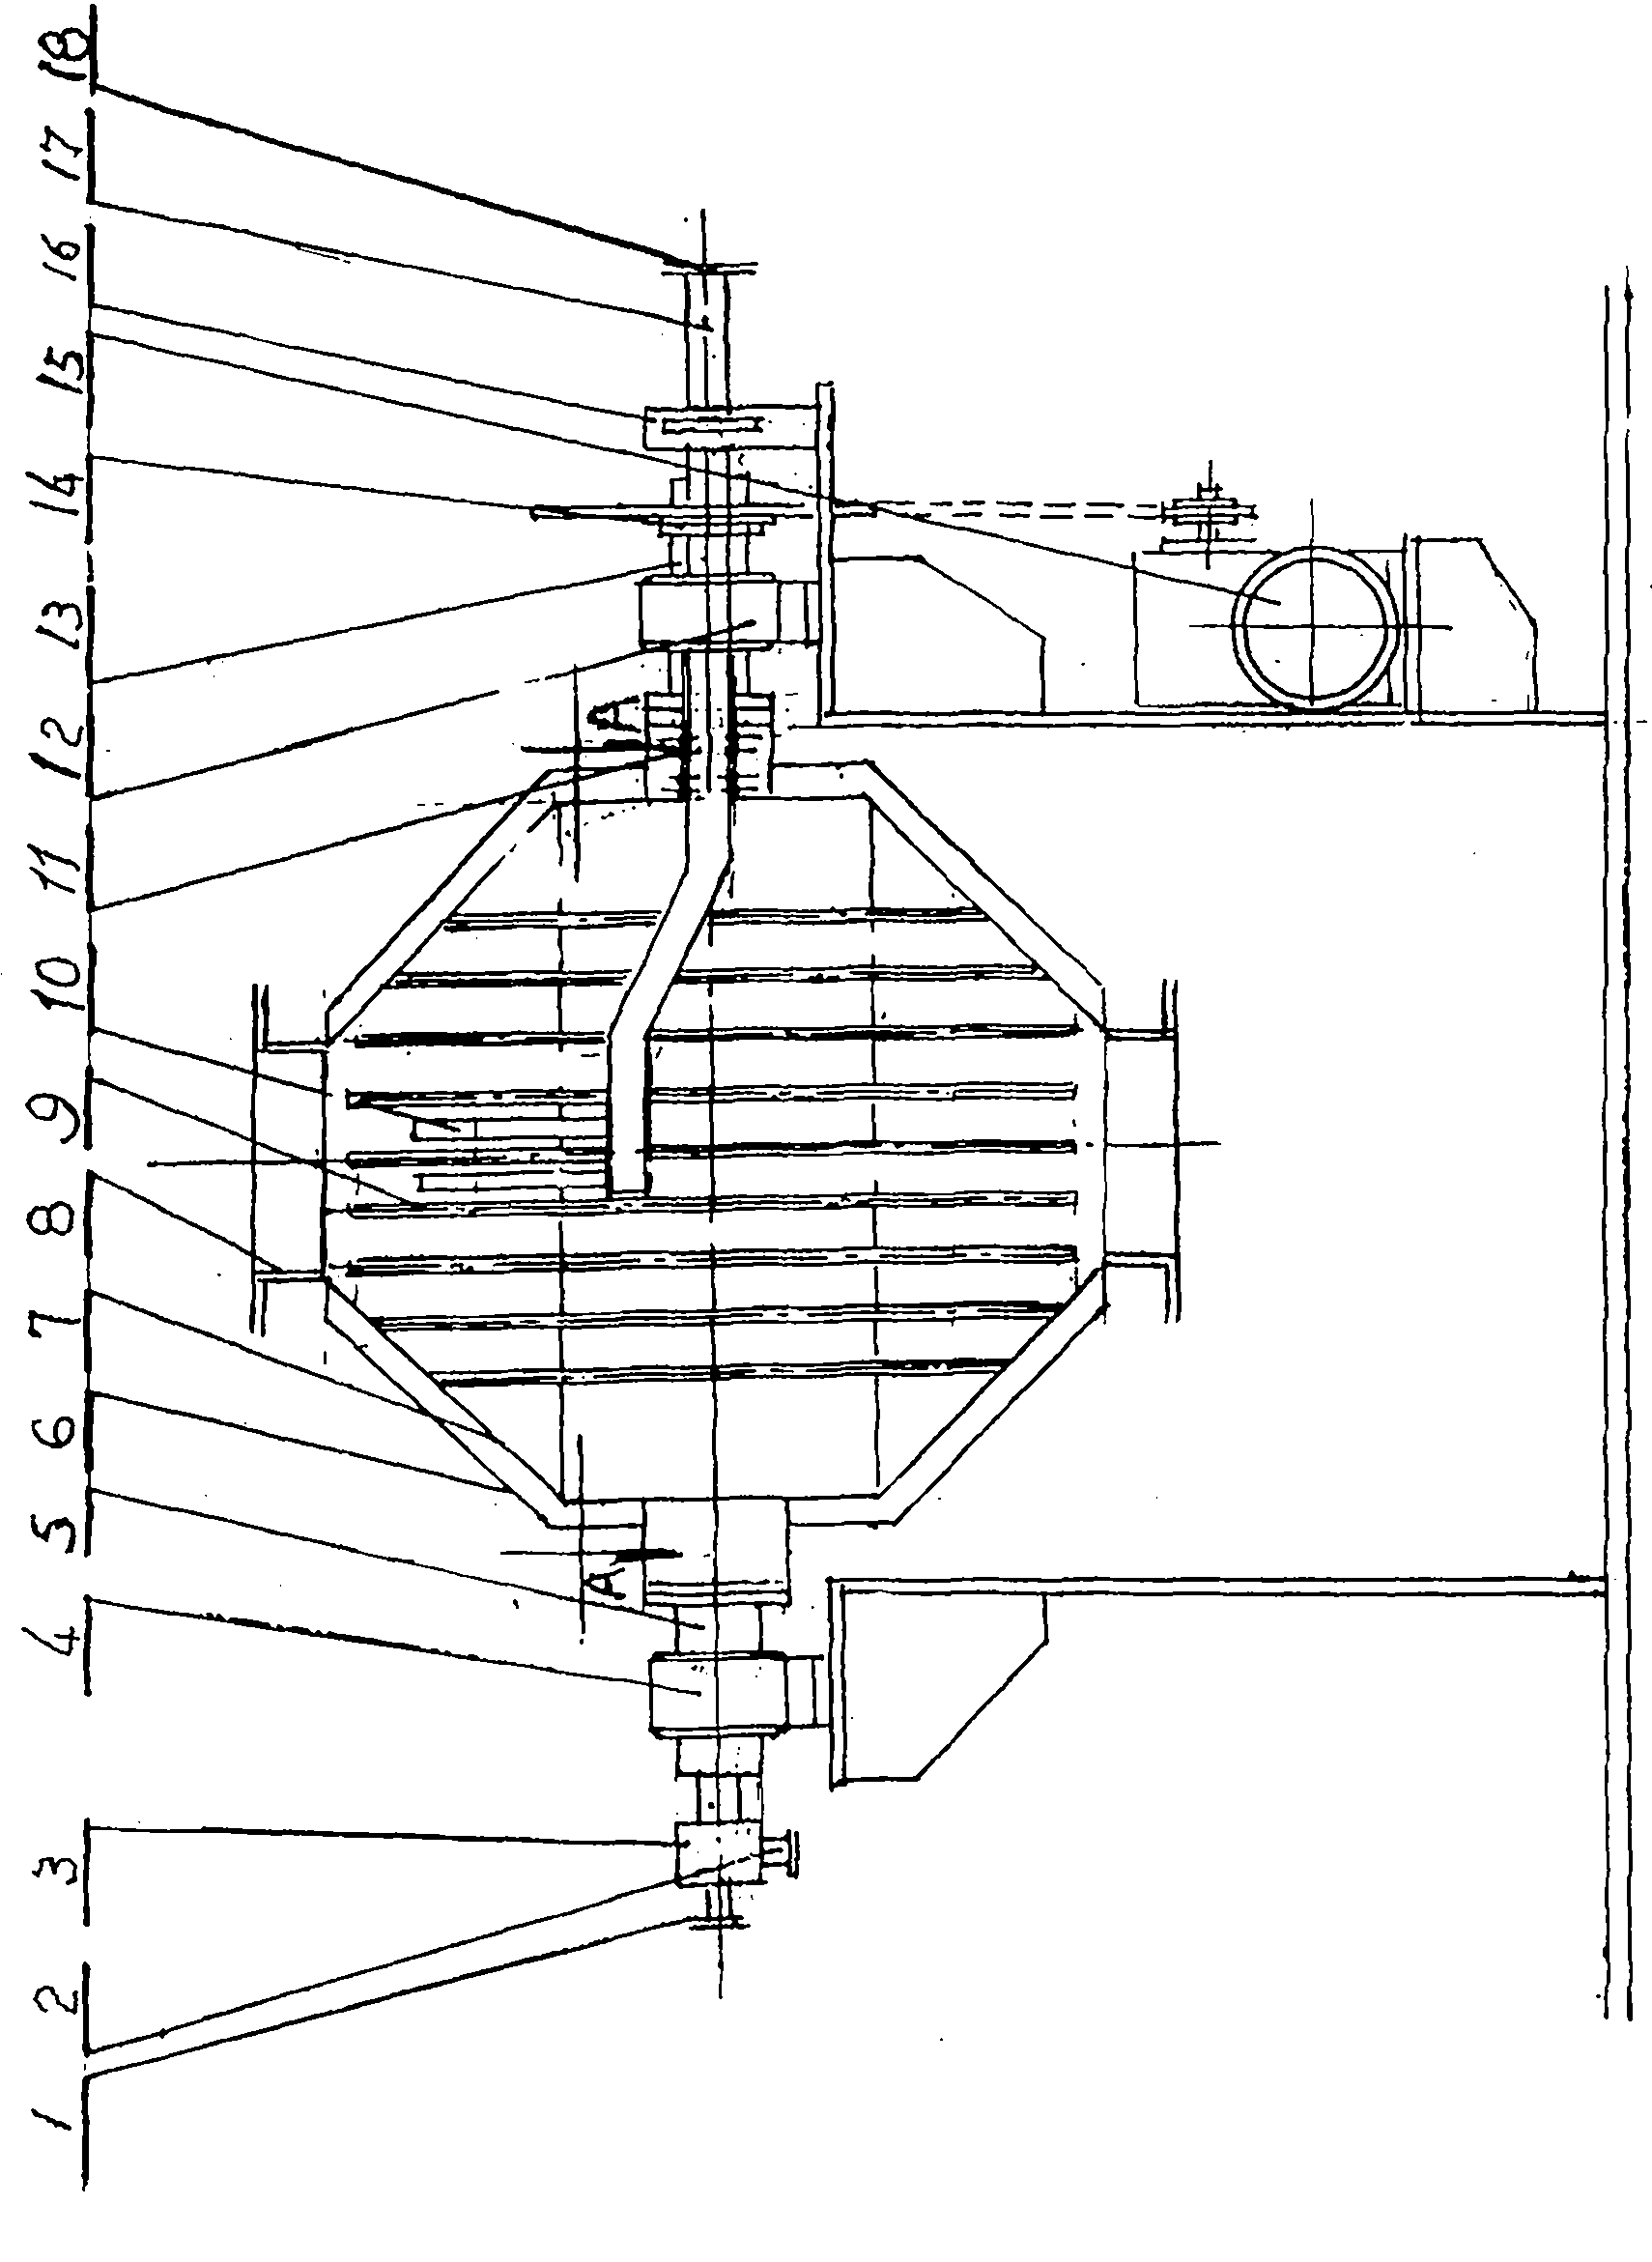 Double-cone vacuum drier with narrow-wedge internal heating plate